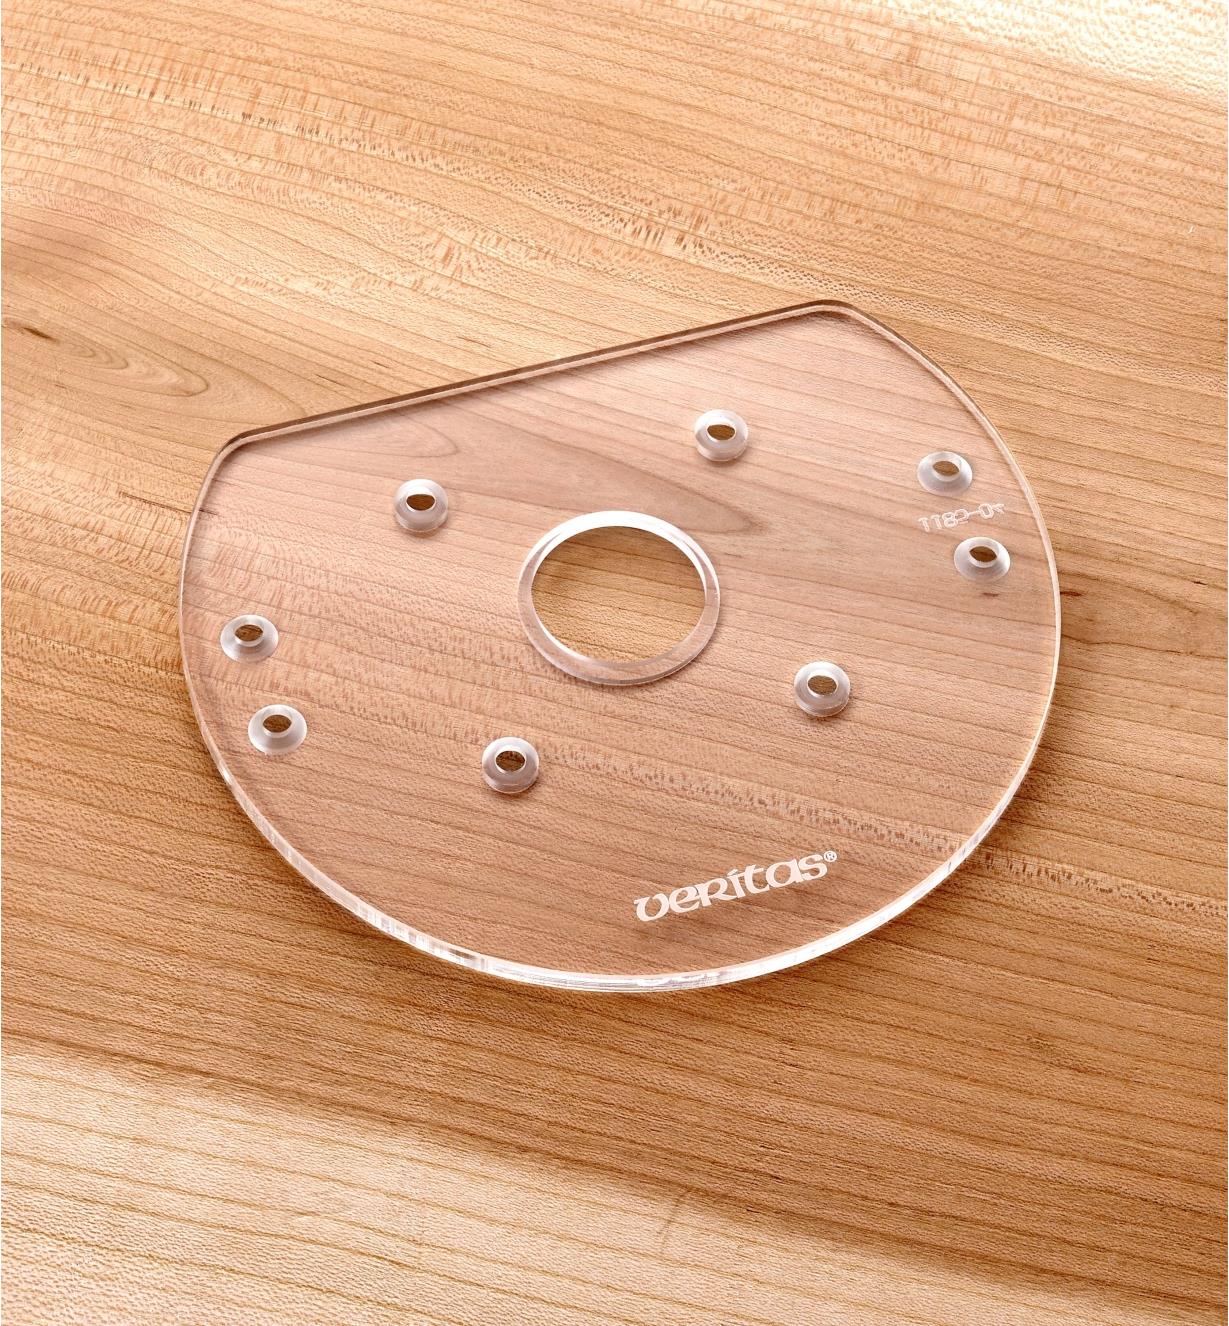 05J6603 - Compact Router Base Plate for Ridgid R2401